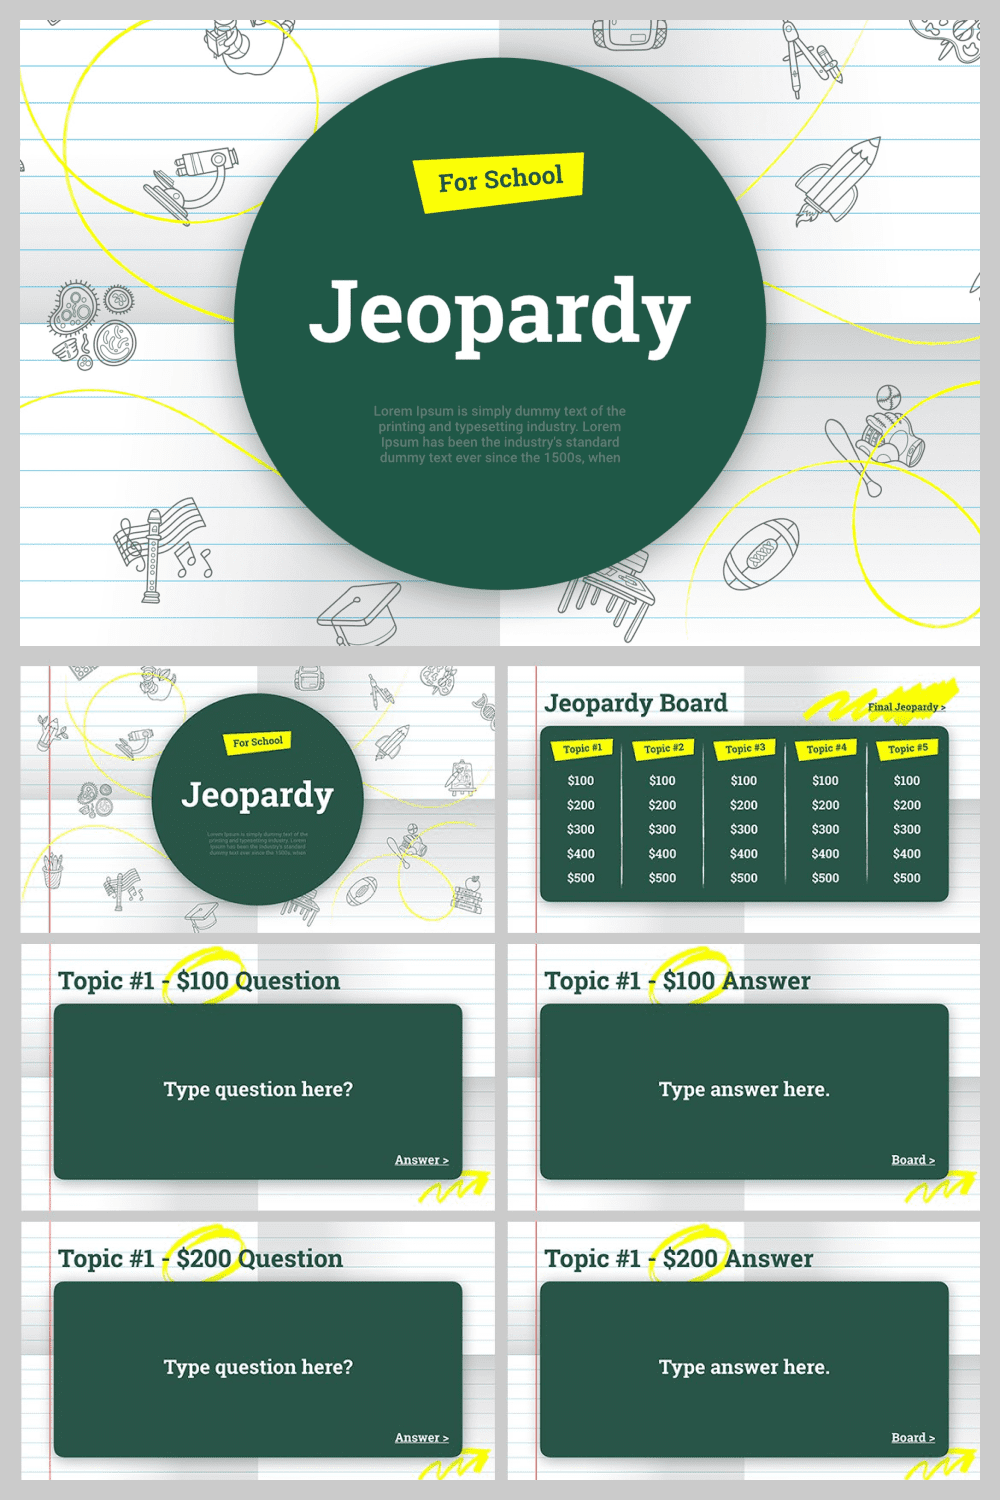 PowerPoint Jeopardy template in a grey and green colors.